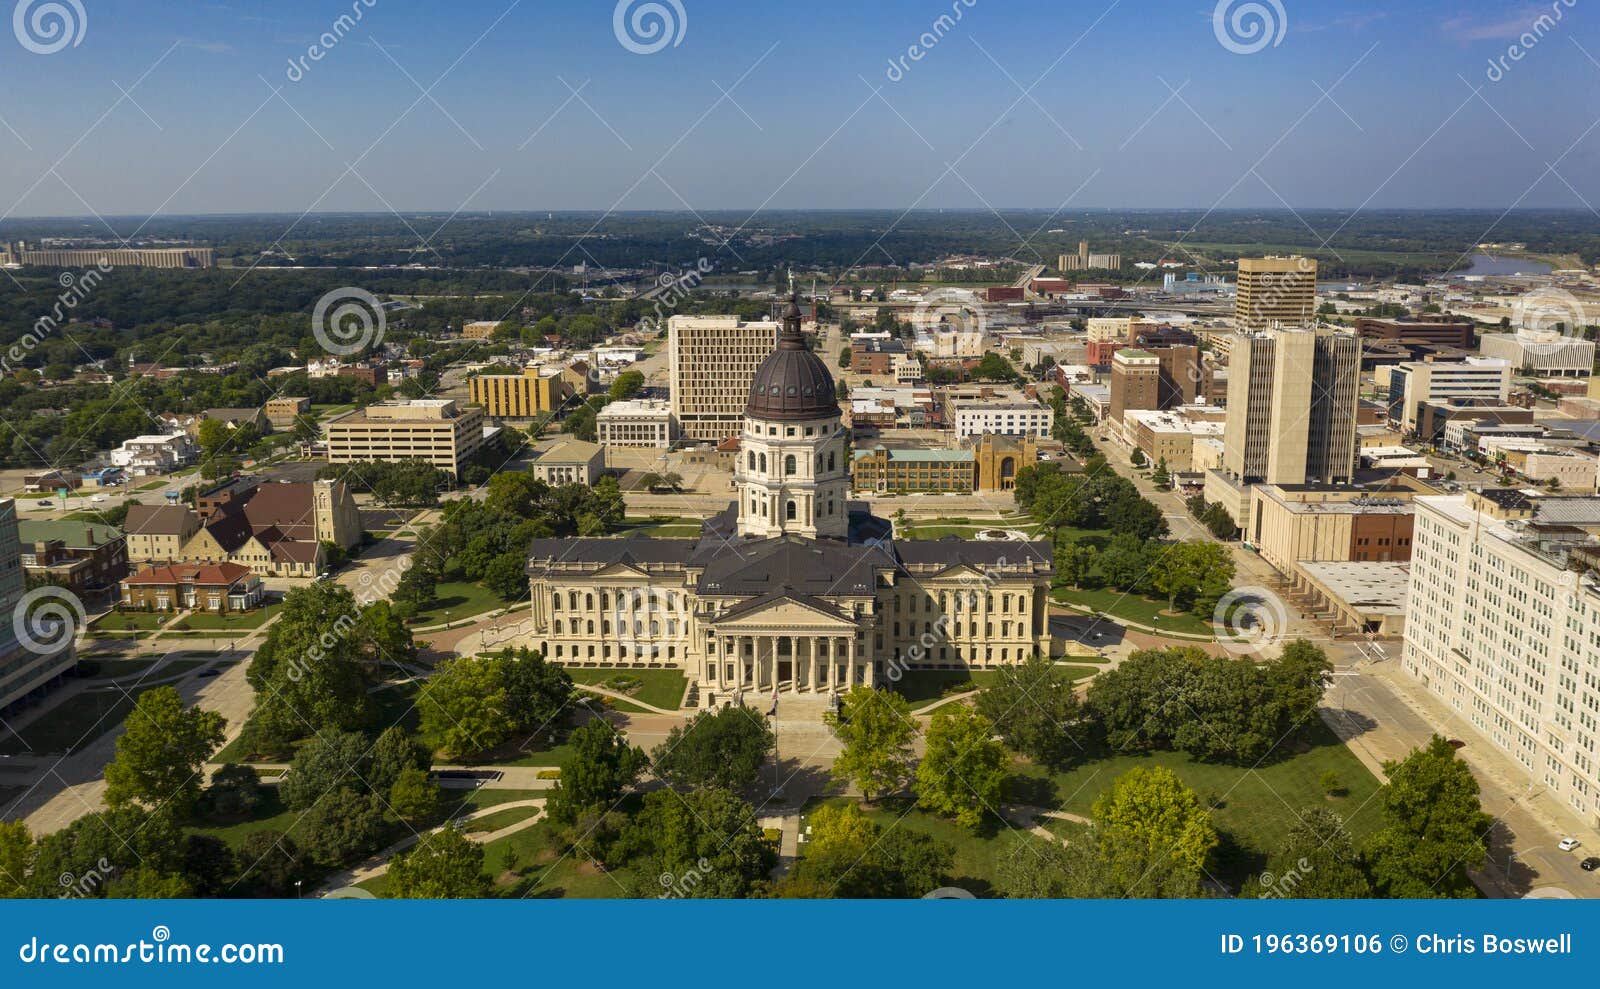 aerial view mid day at the state capital building in topeka kansas usa